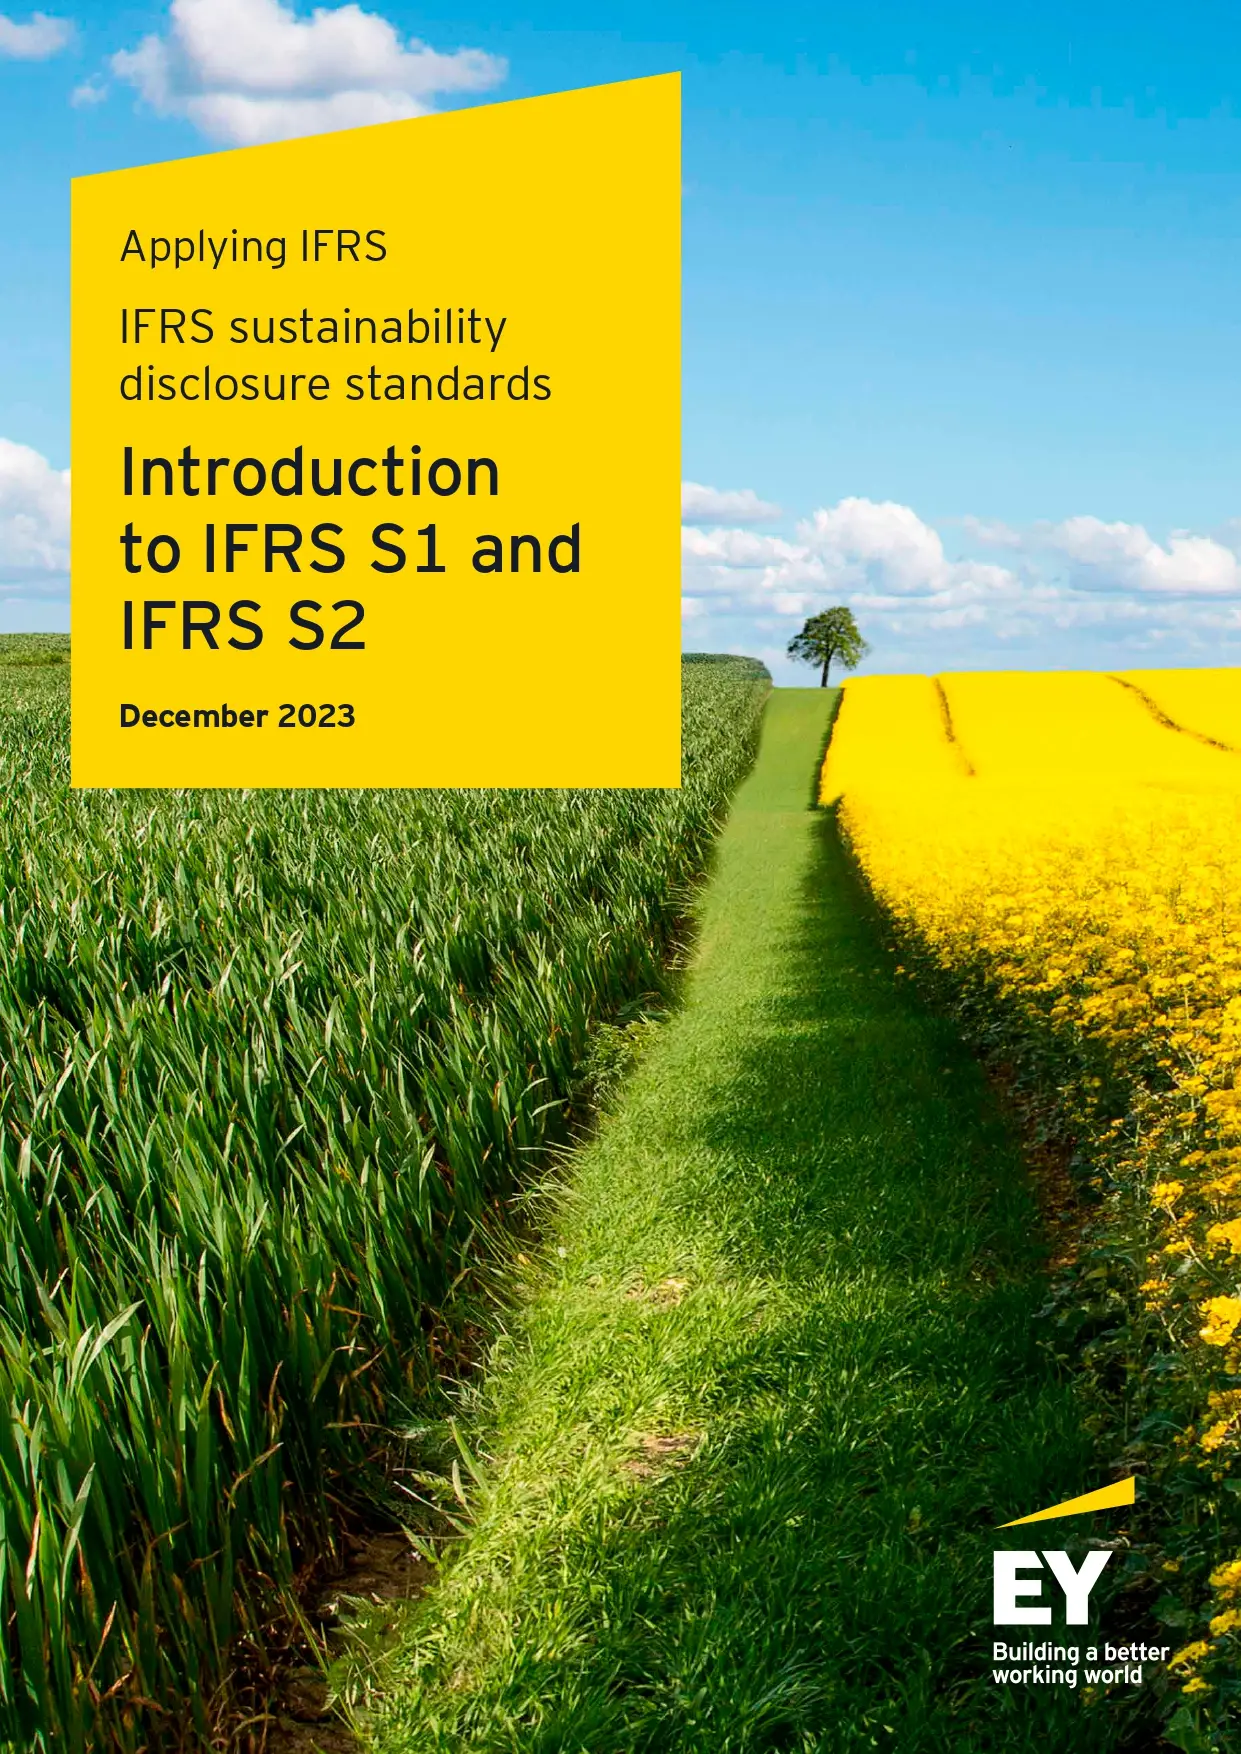 Introduction To IFRS S1 And IFRS S2